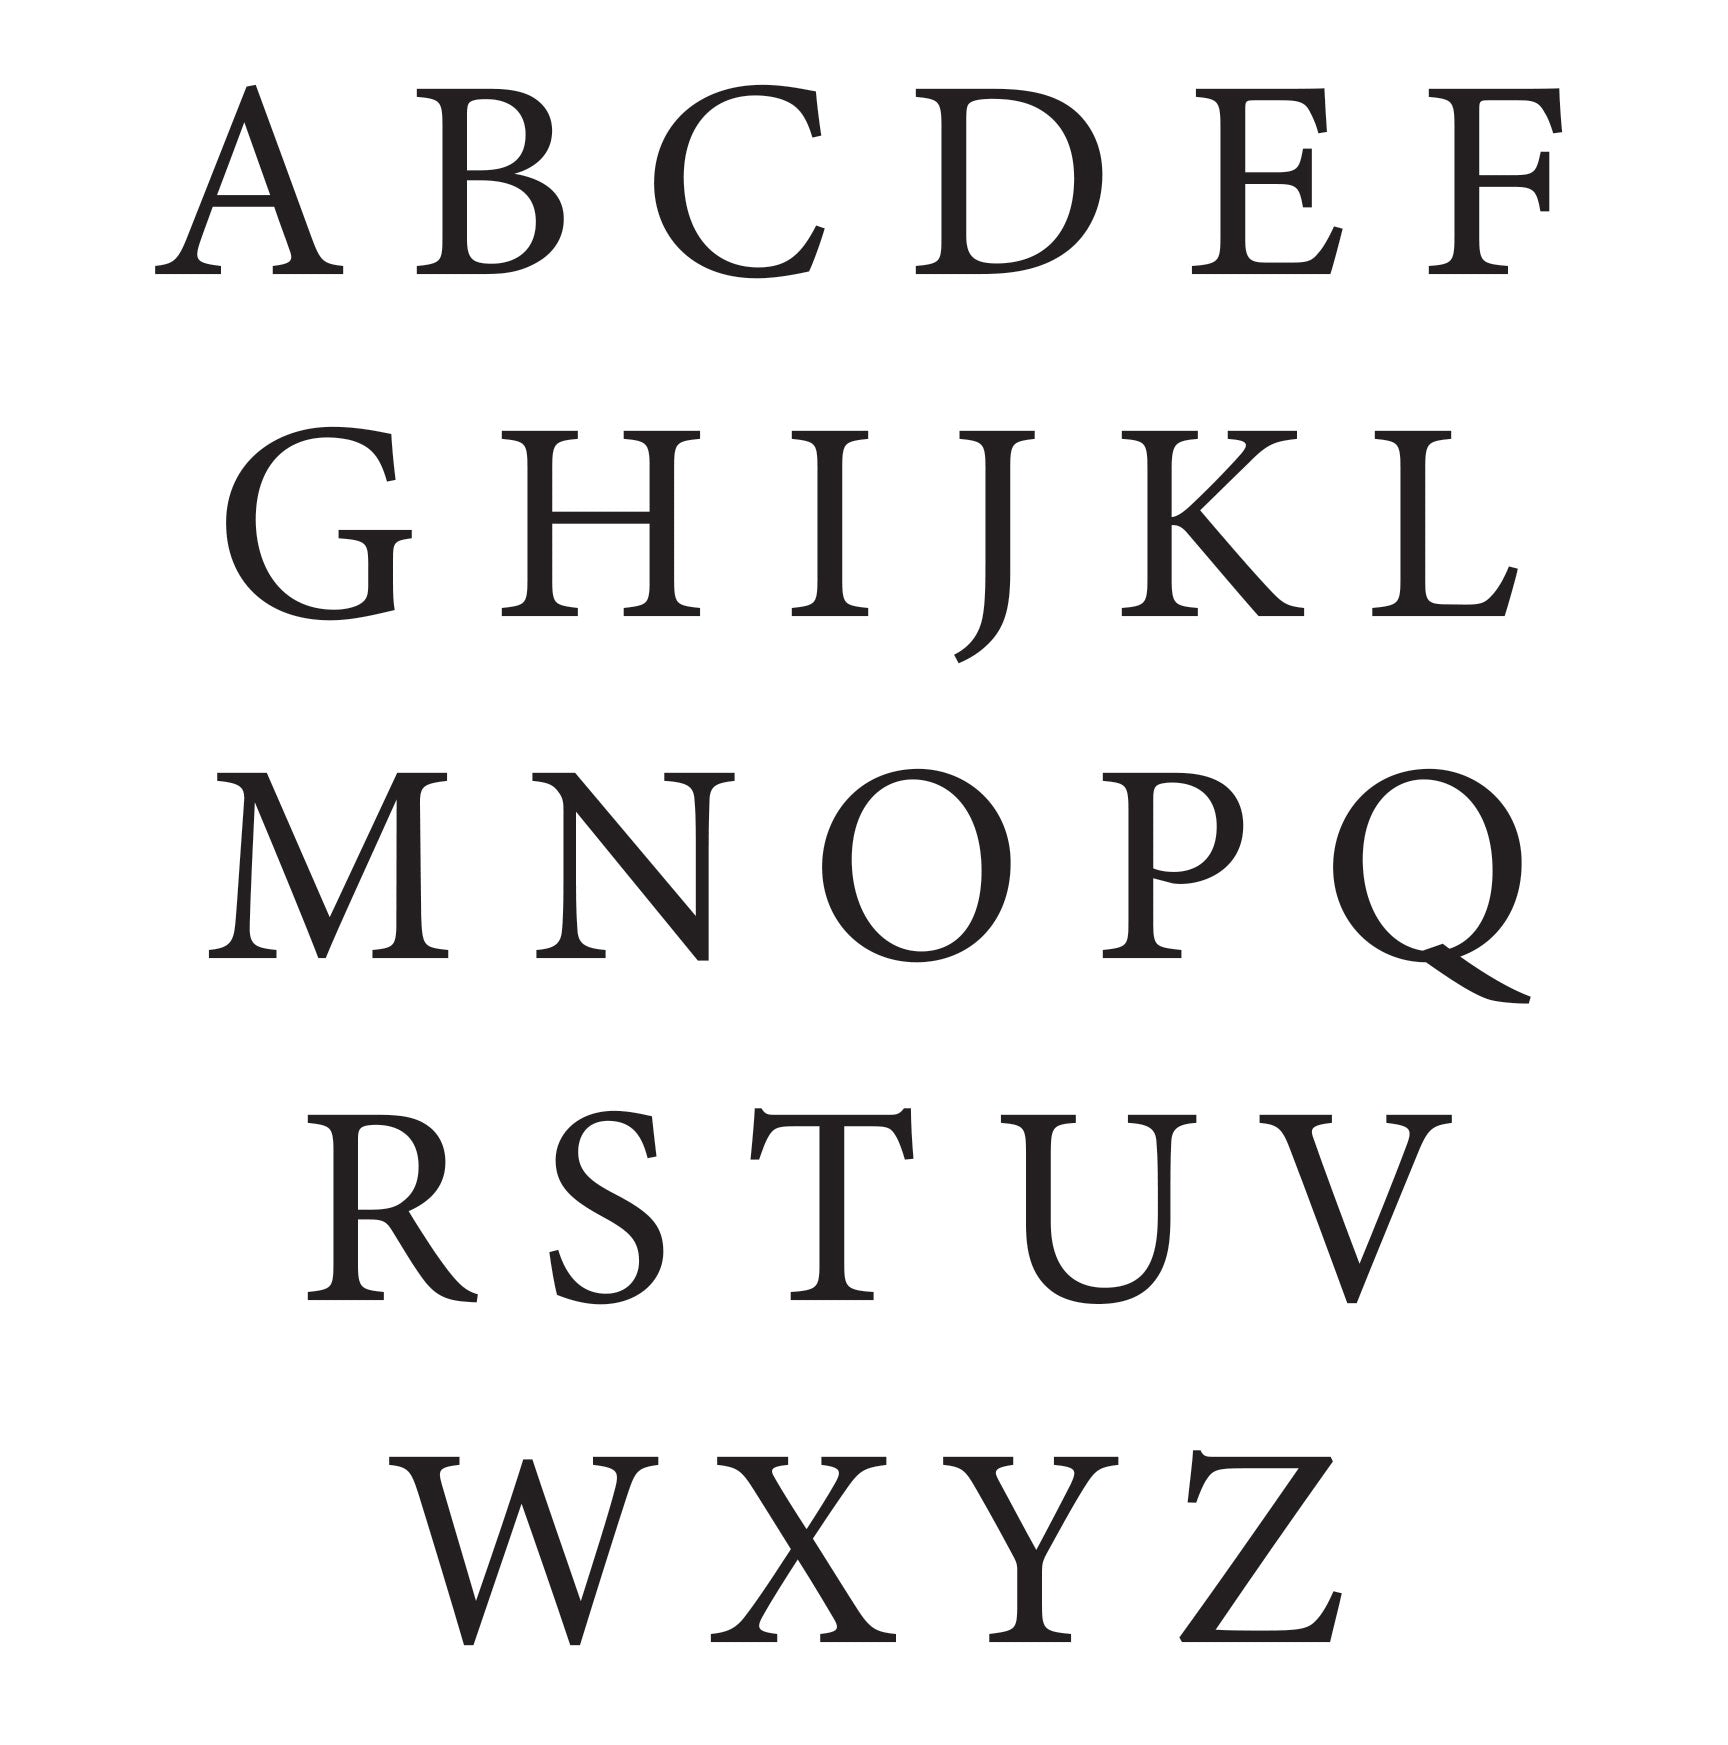 An example of each letter in the font that it will be printed in.